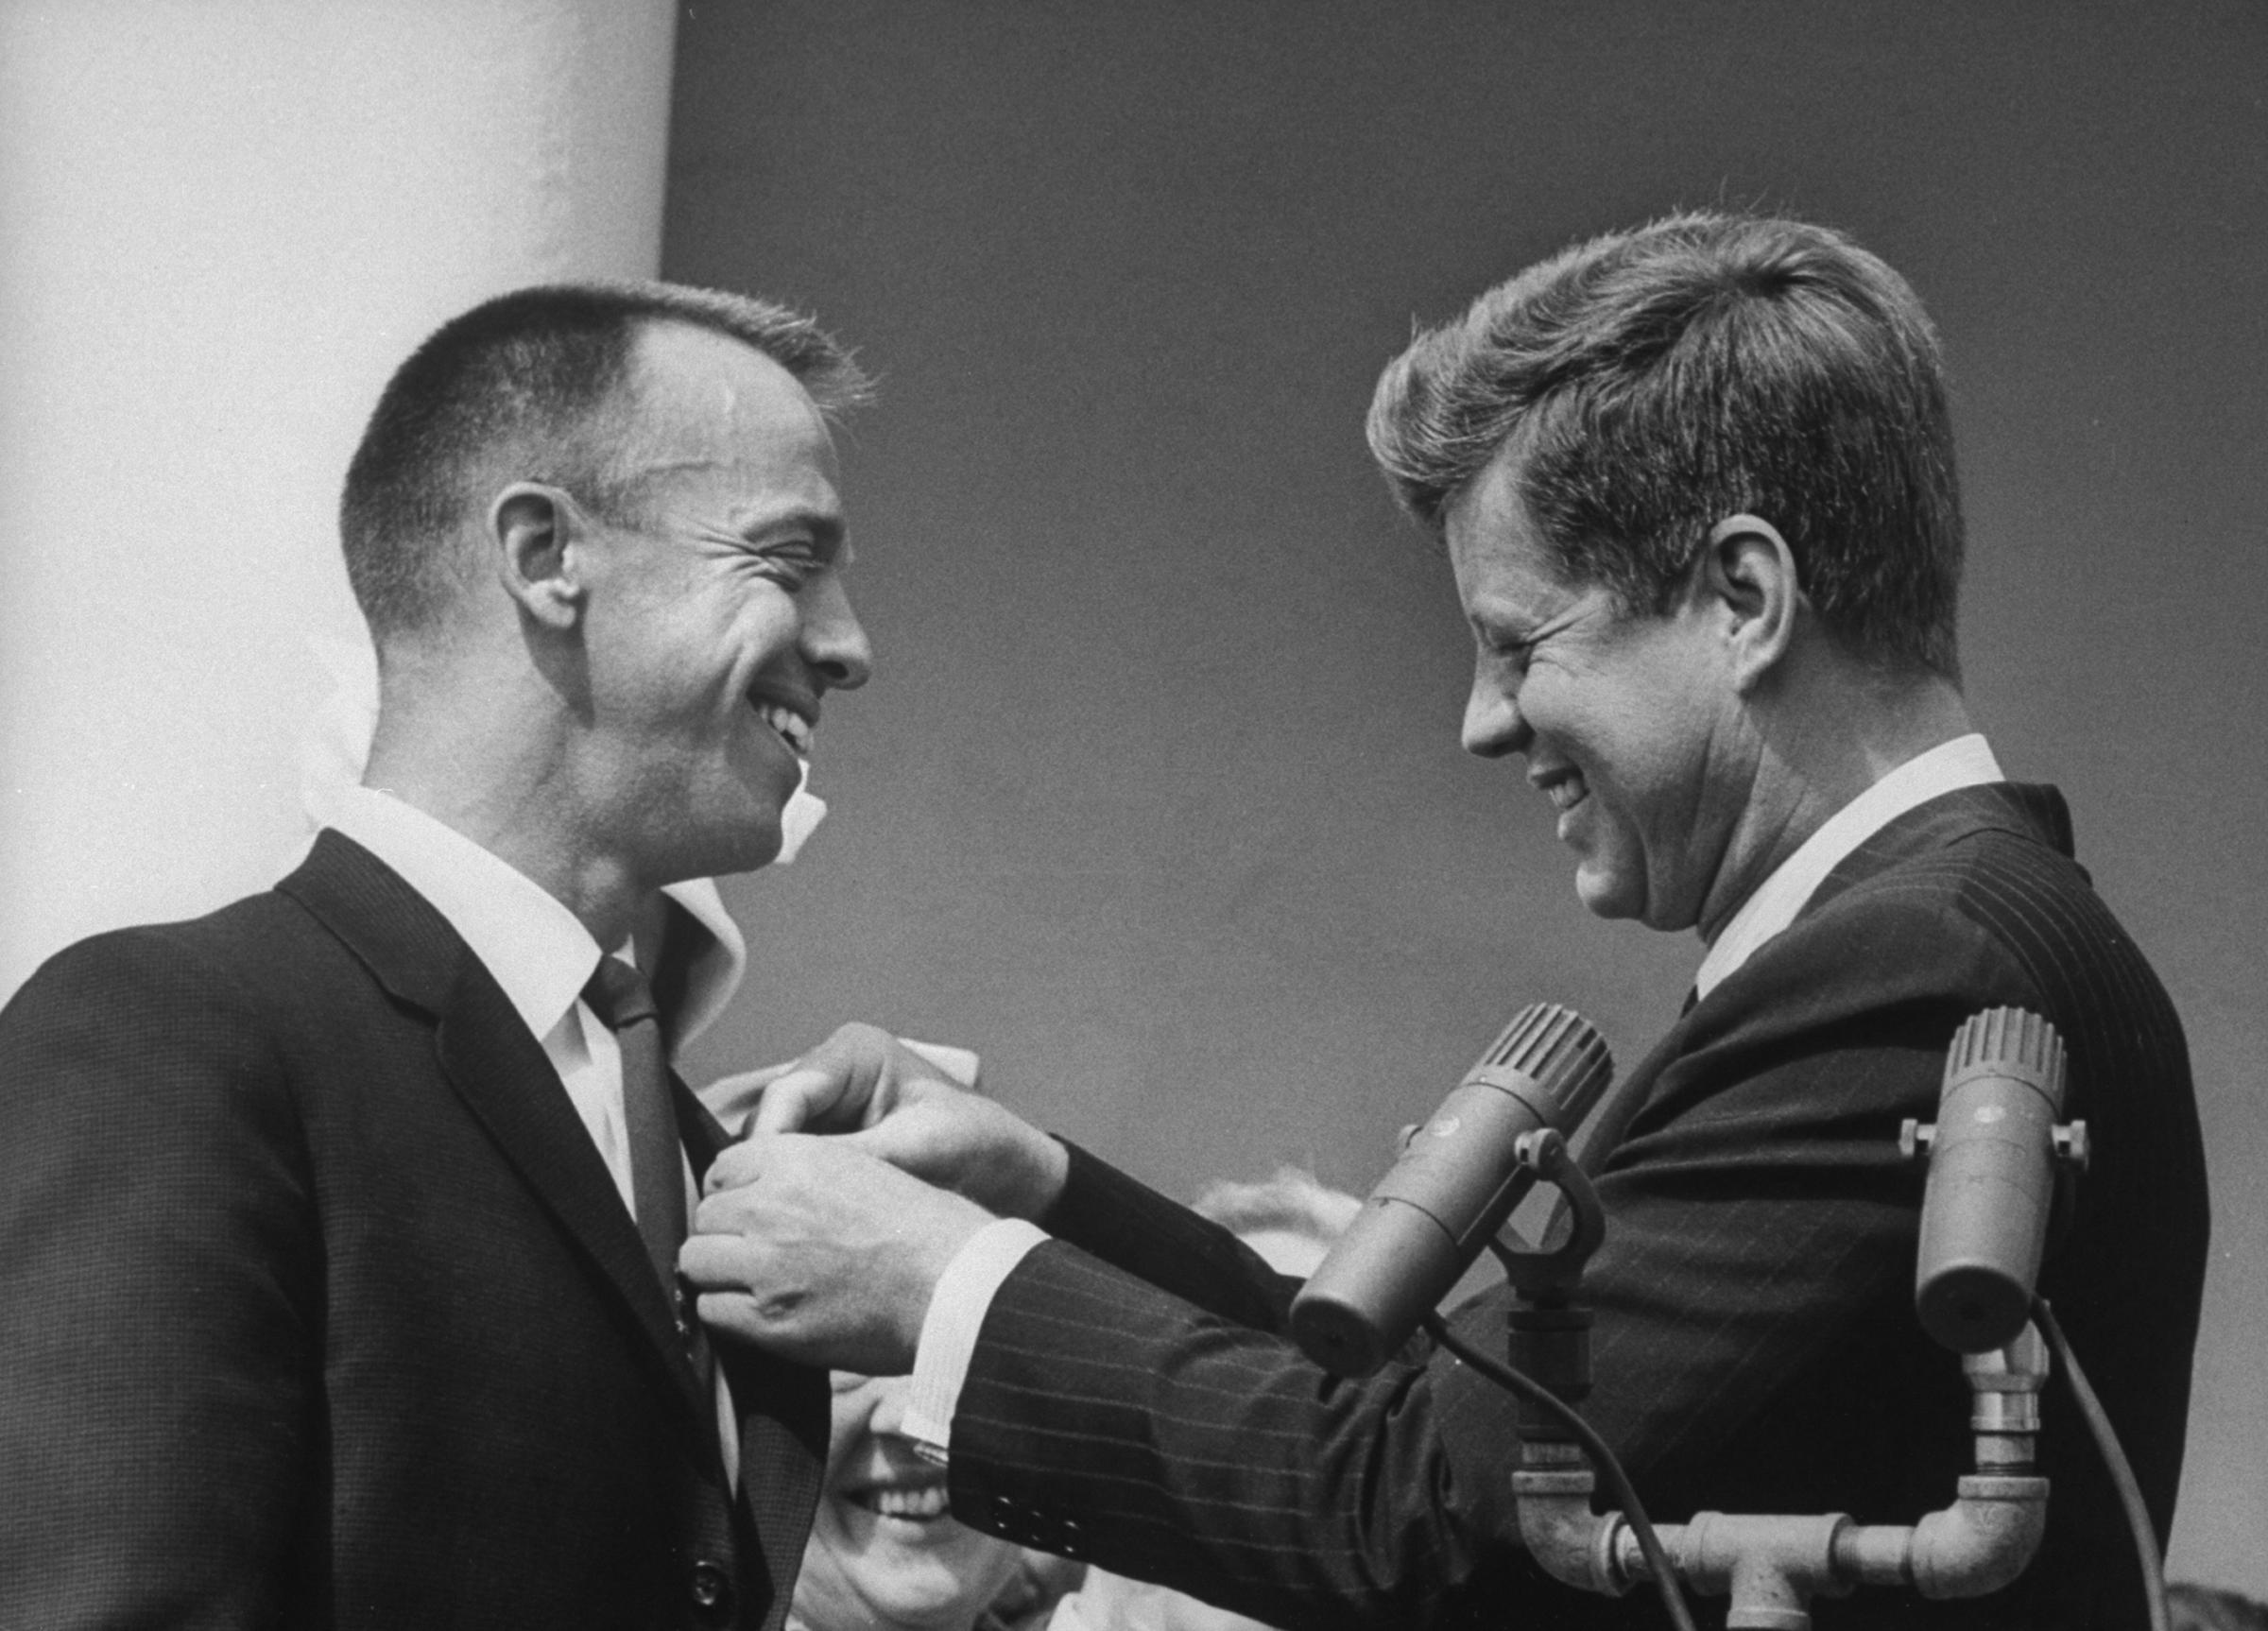 President John Kennedy pins NASA's Distinguished Service Medal on Alan Shepard's chest, May 8, 1961.